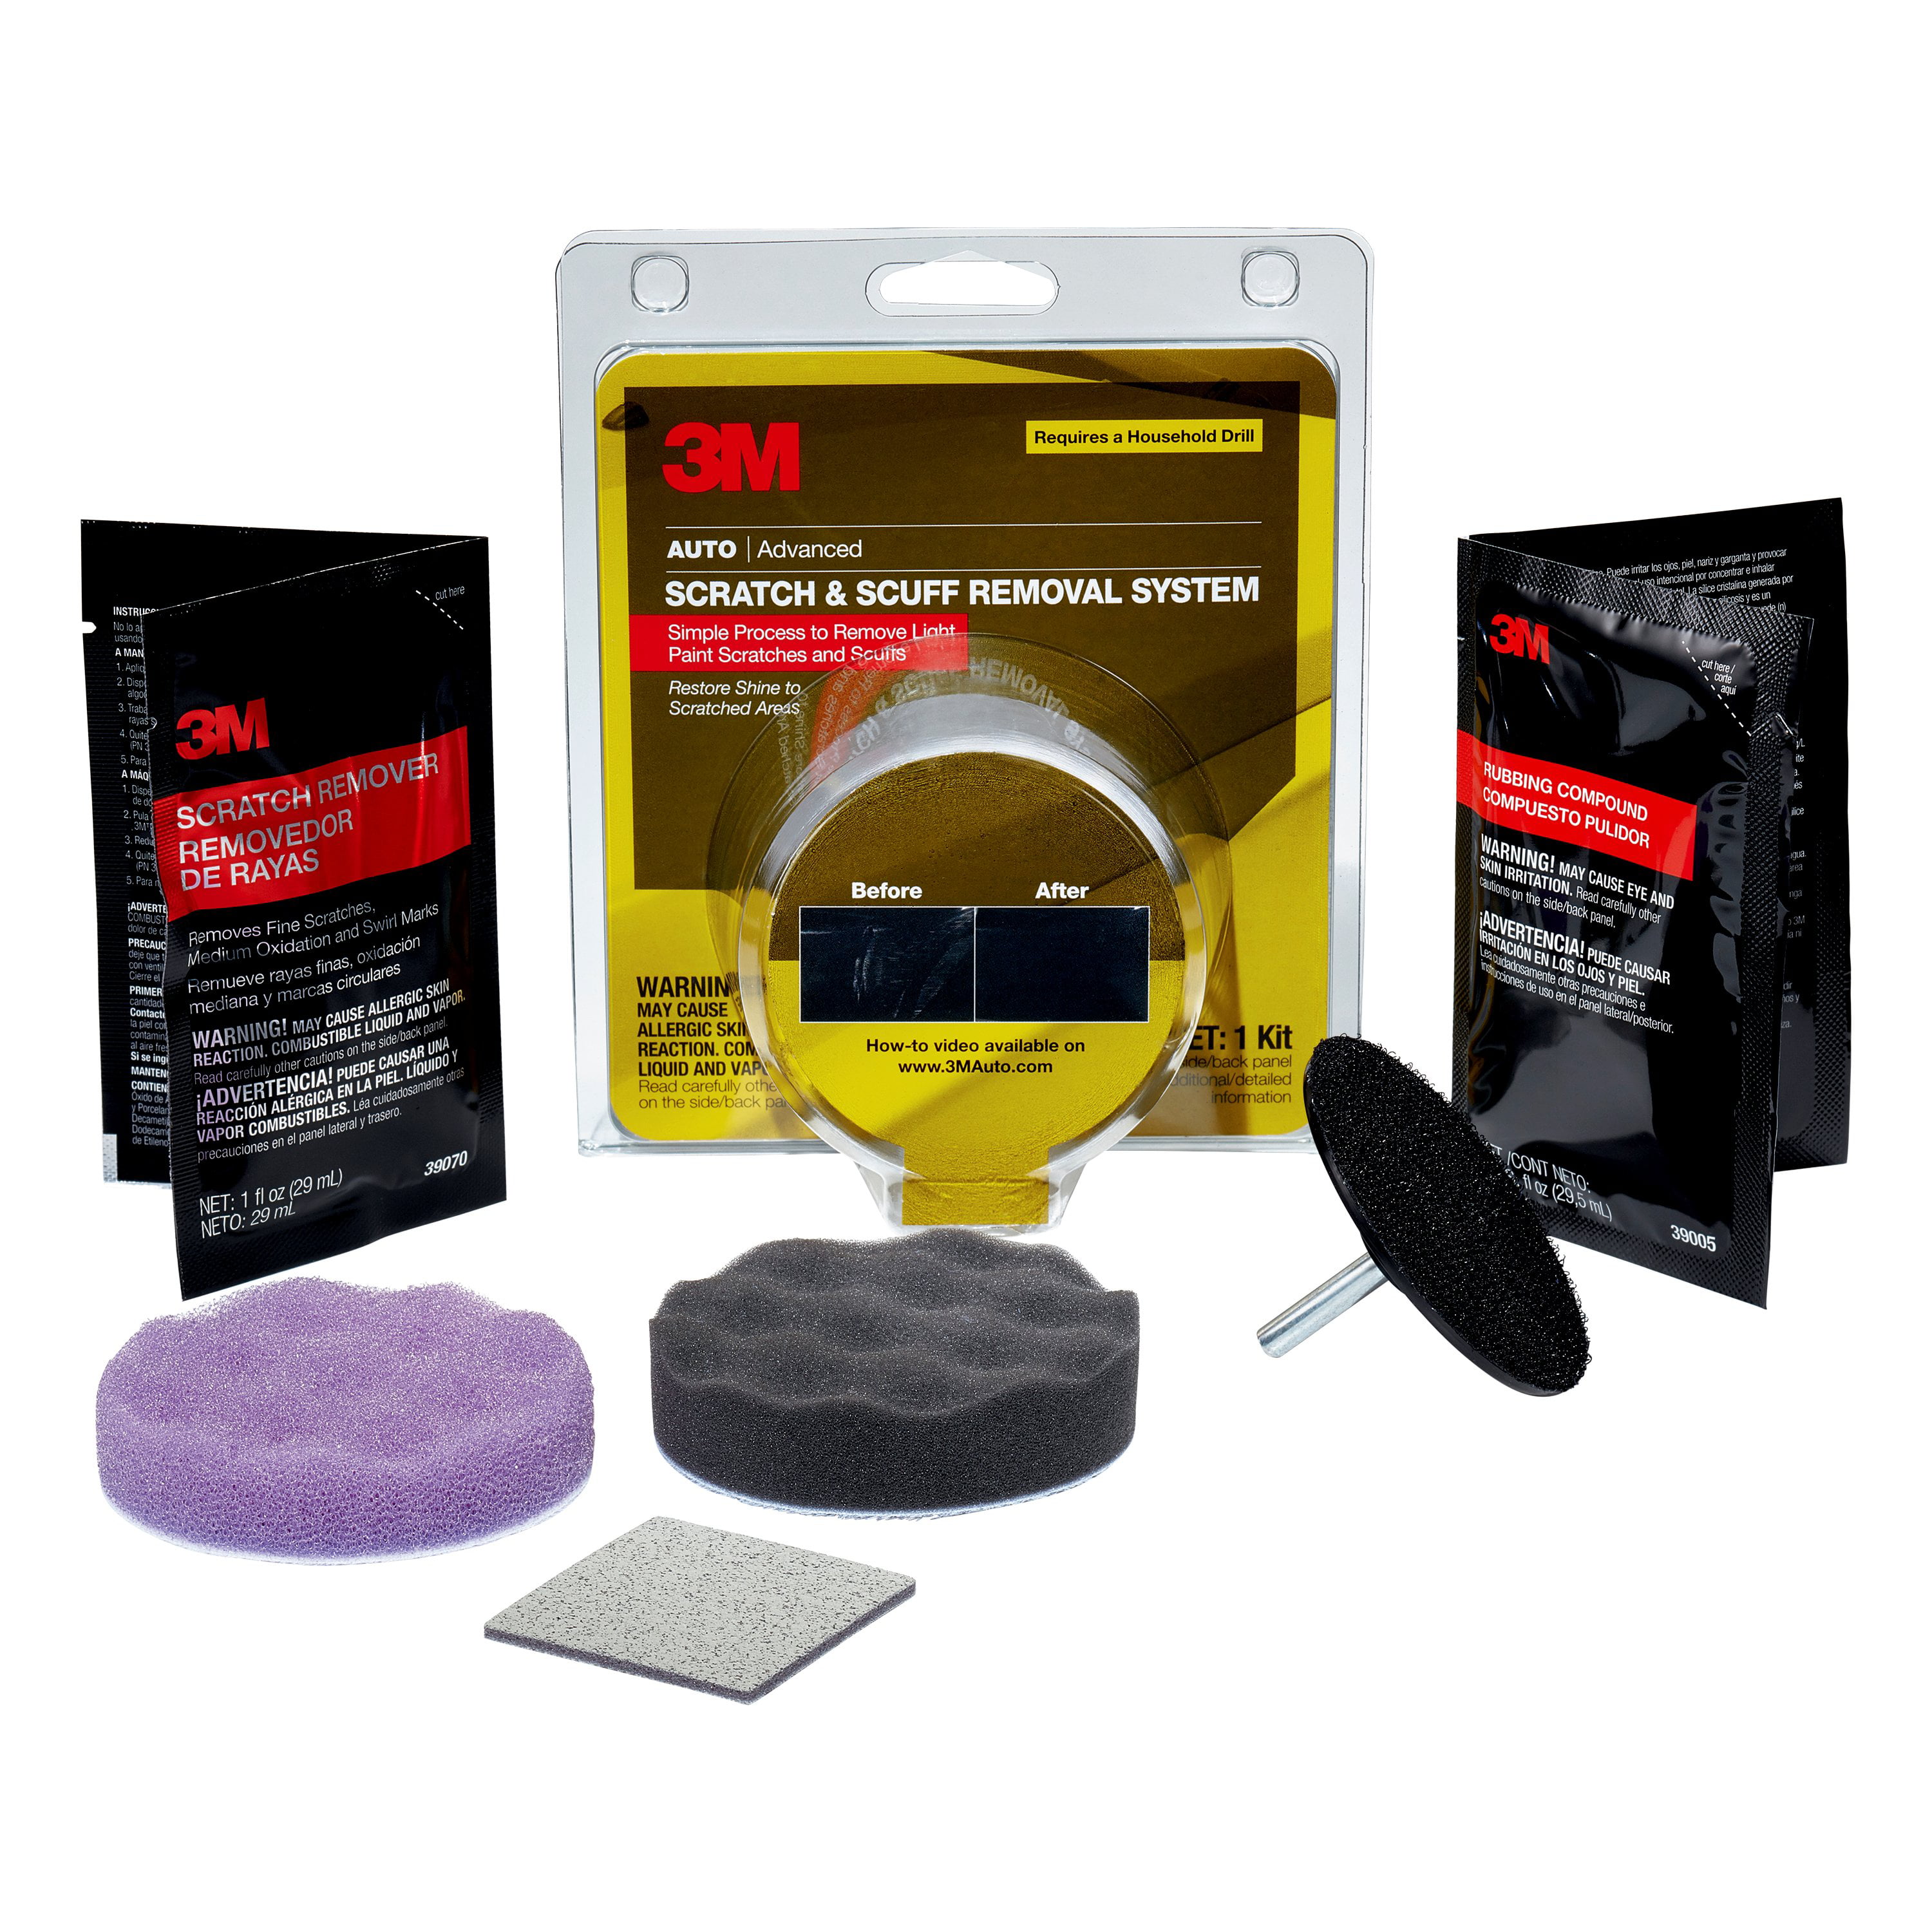 3M Scratch Remover, For Vehicles, 16oz. 33044